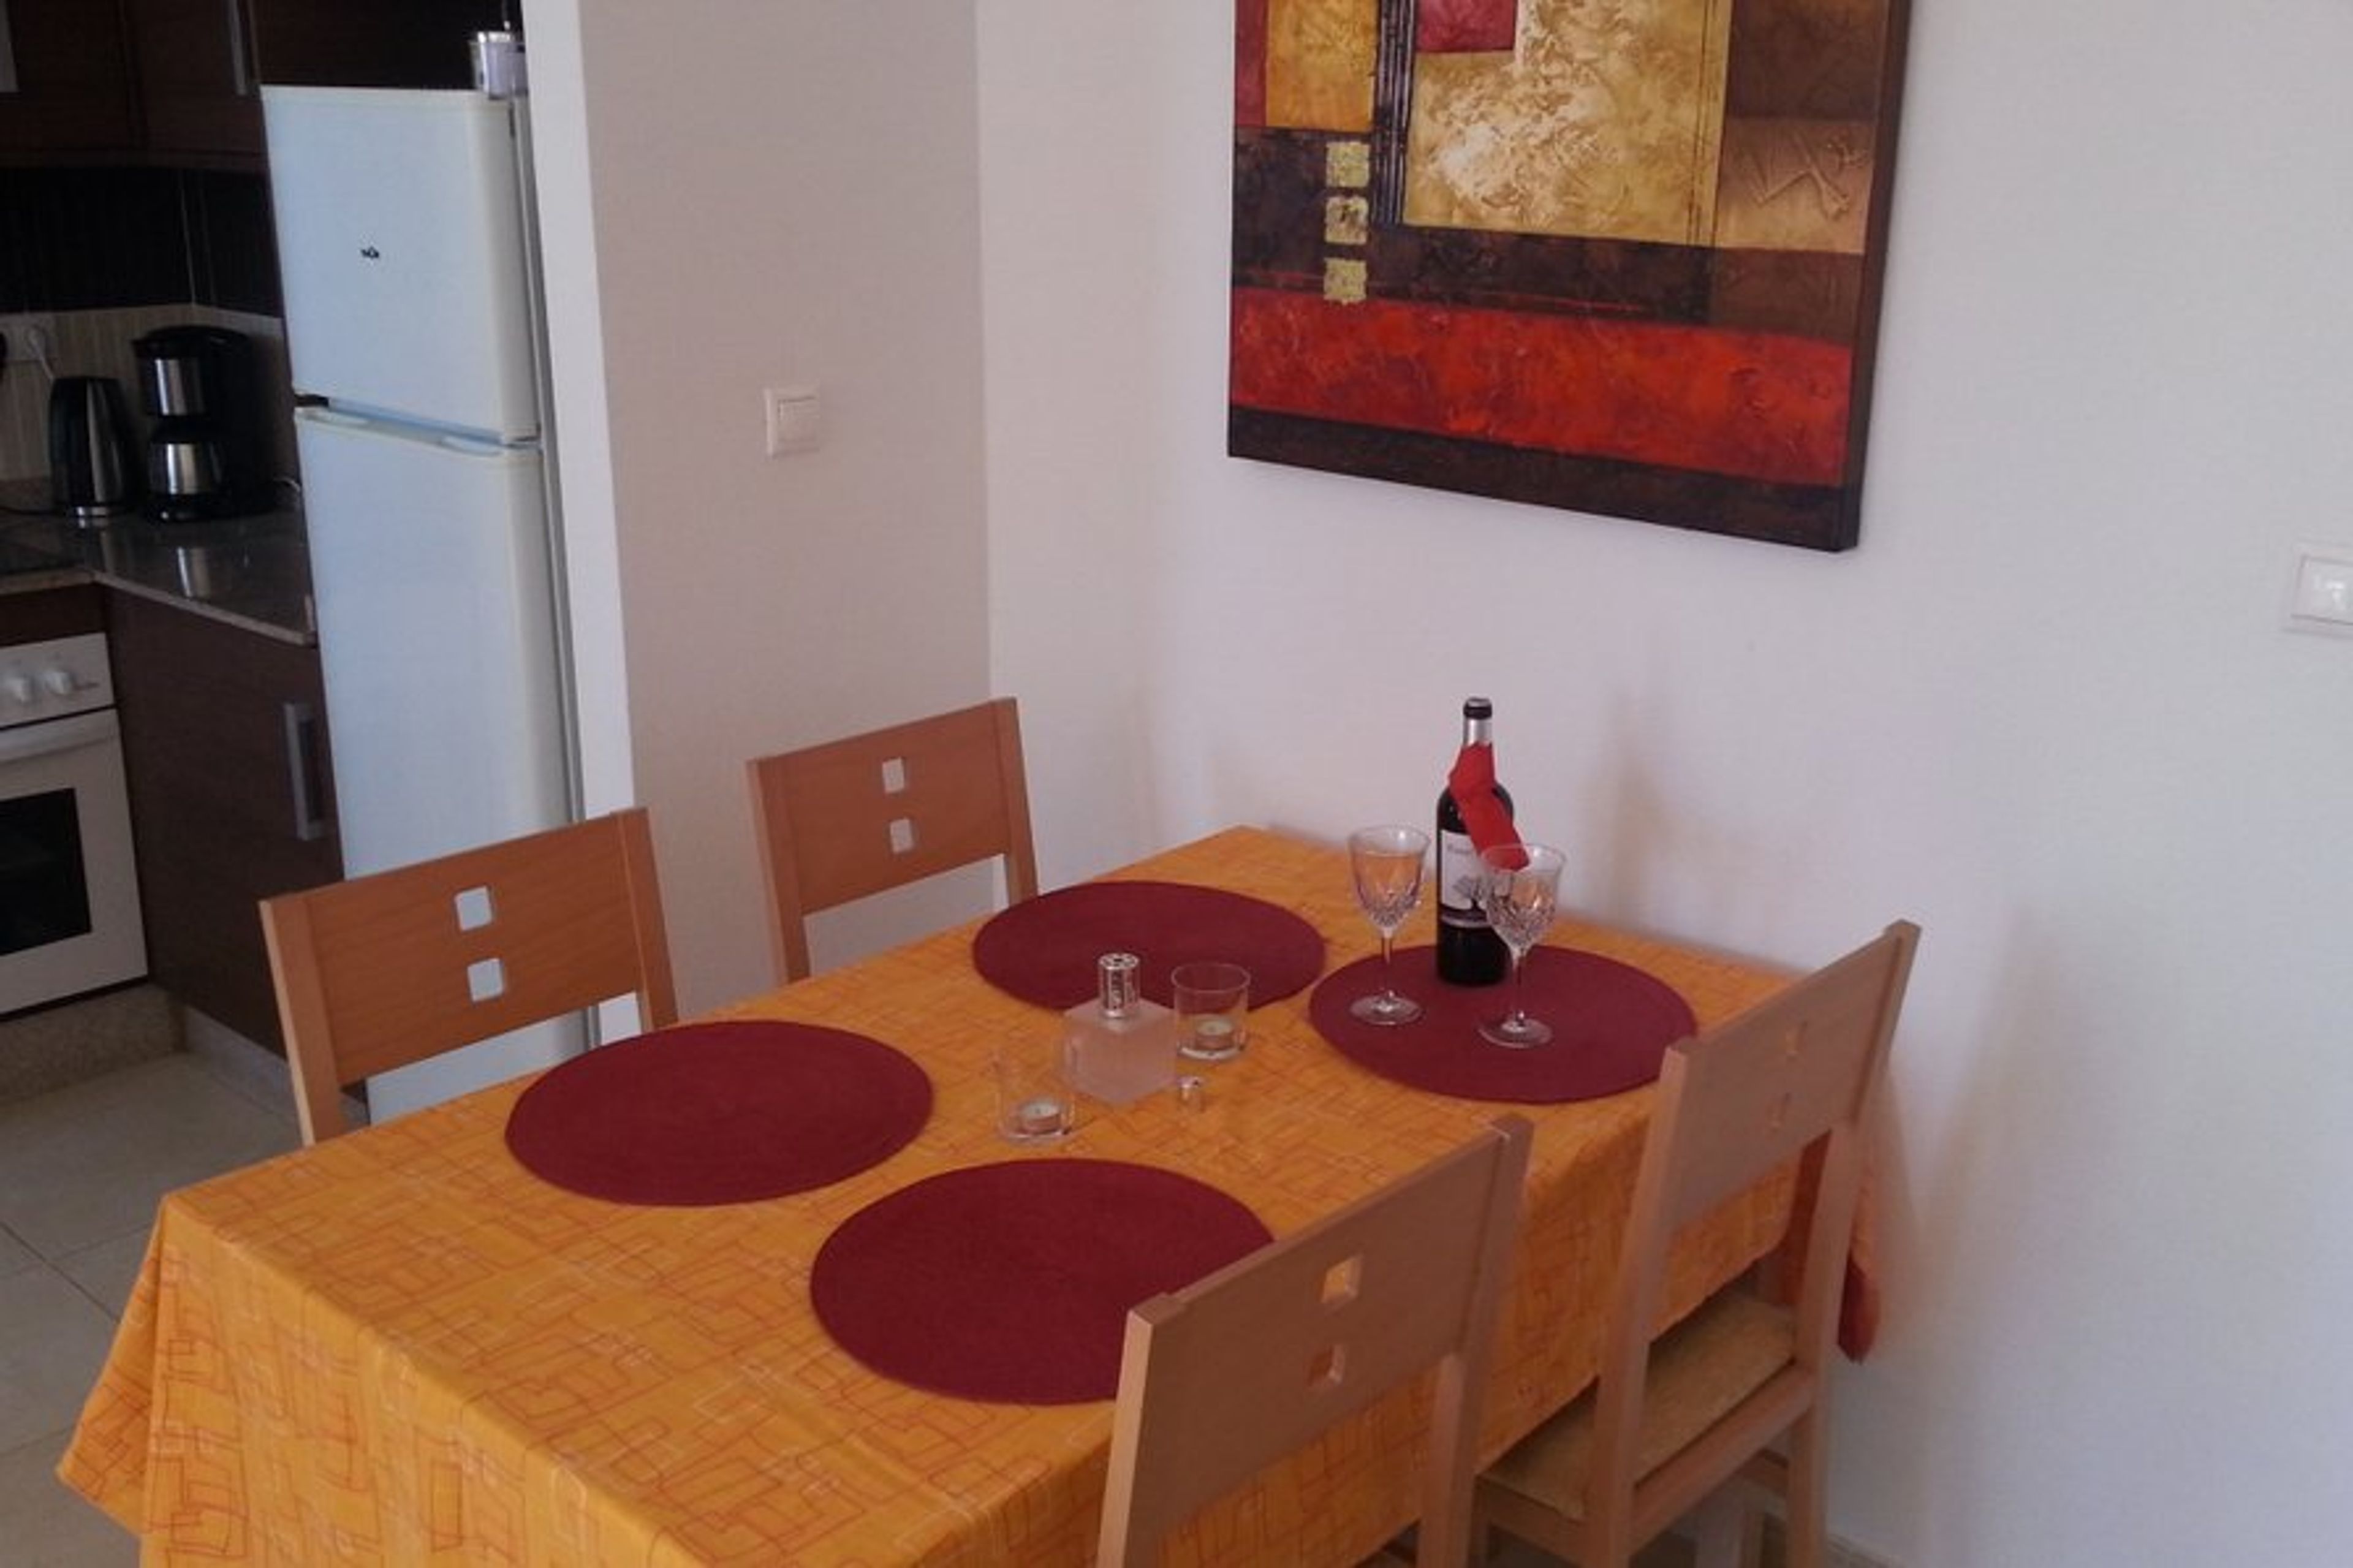 Dining area for 4 people.